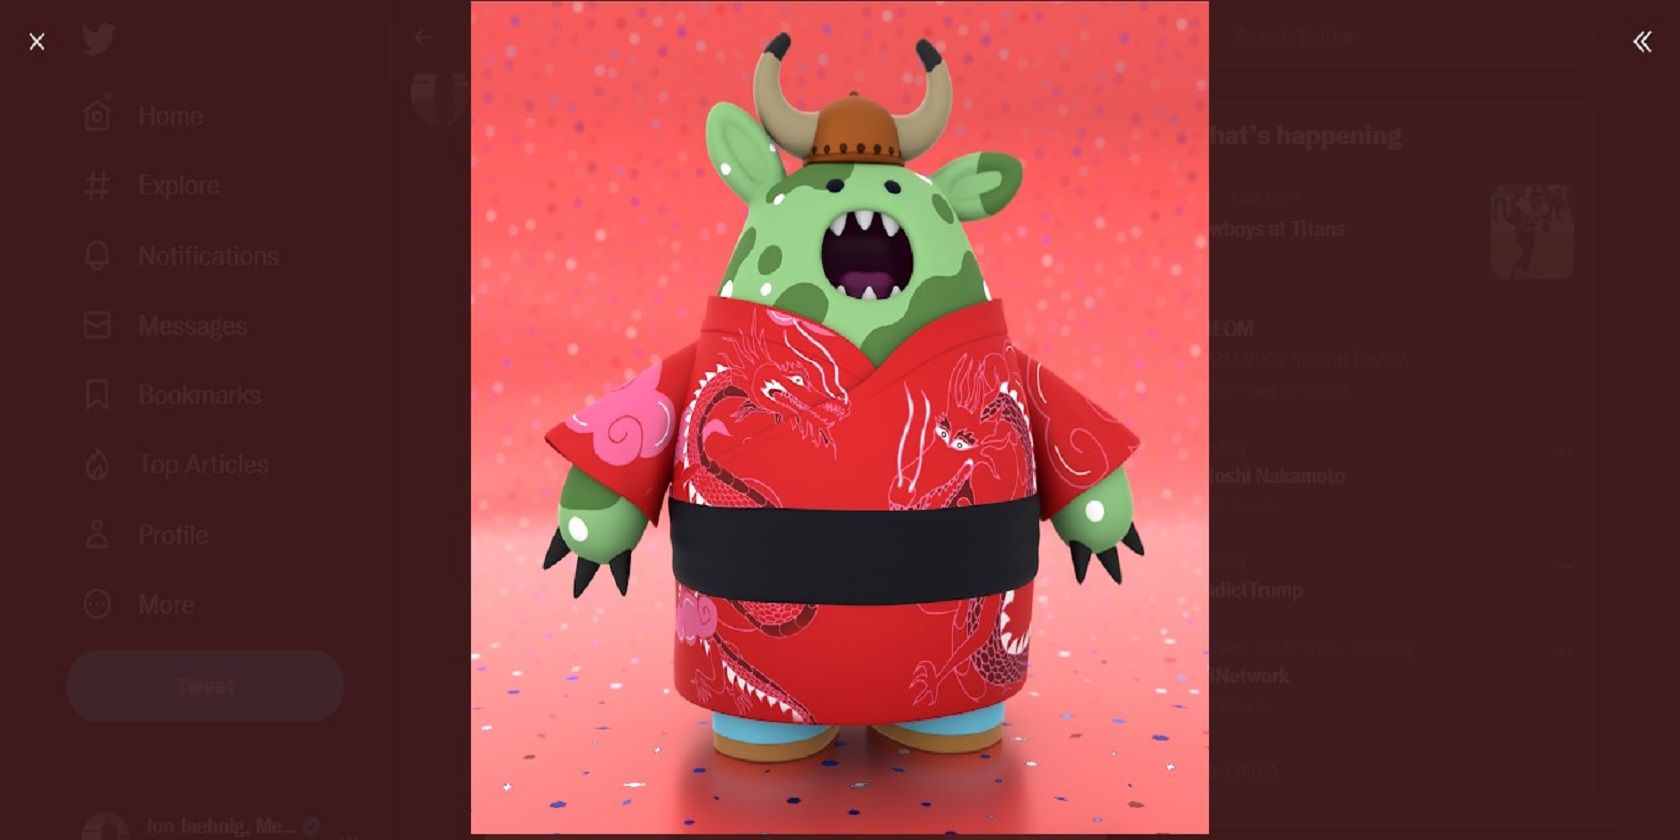 Do check out my latest pfp toyface drop on opensea ! Guys do share ur love  and support ! Let's all win this together. Link in comment ! Both twitter  and opensea ! ❤️ : r/opensea